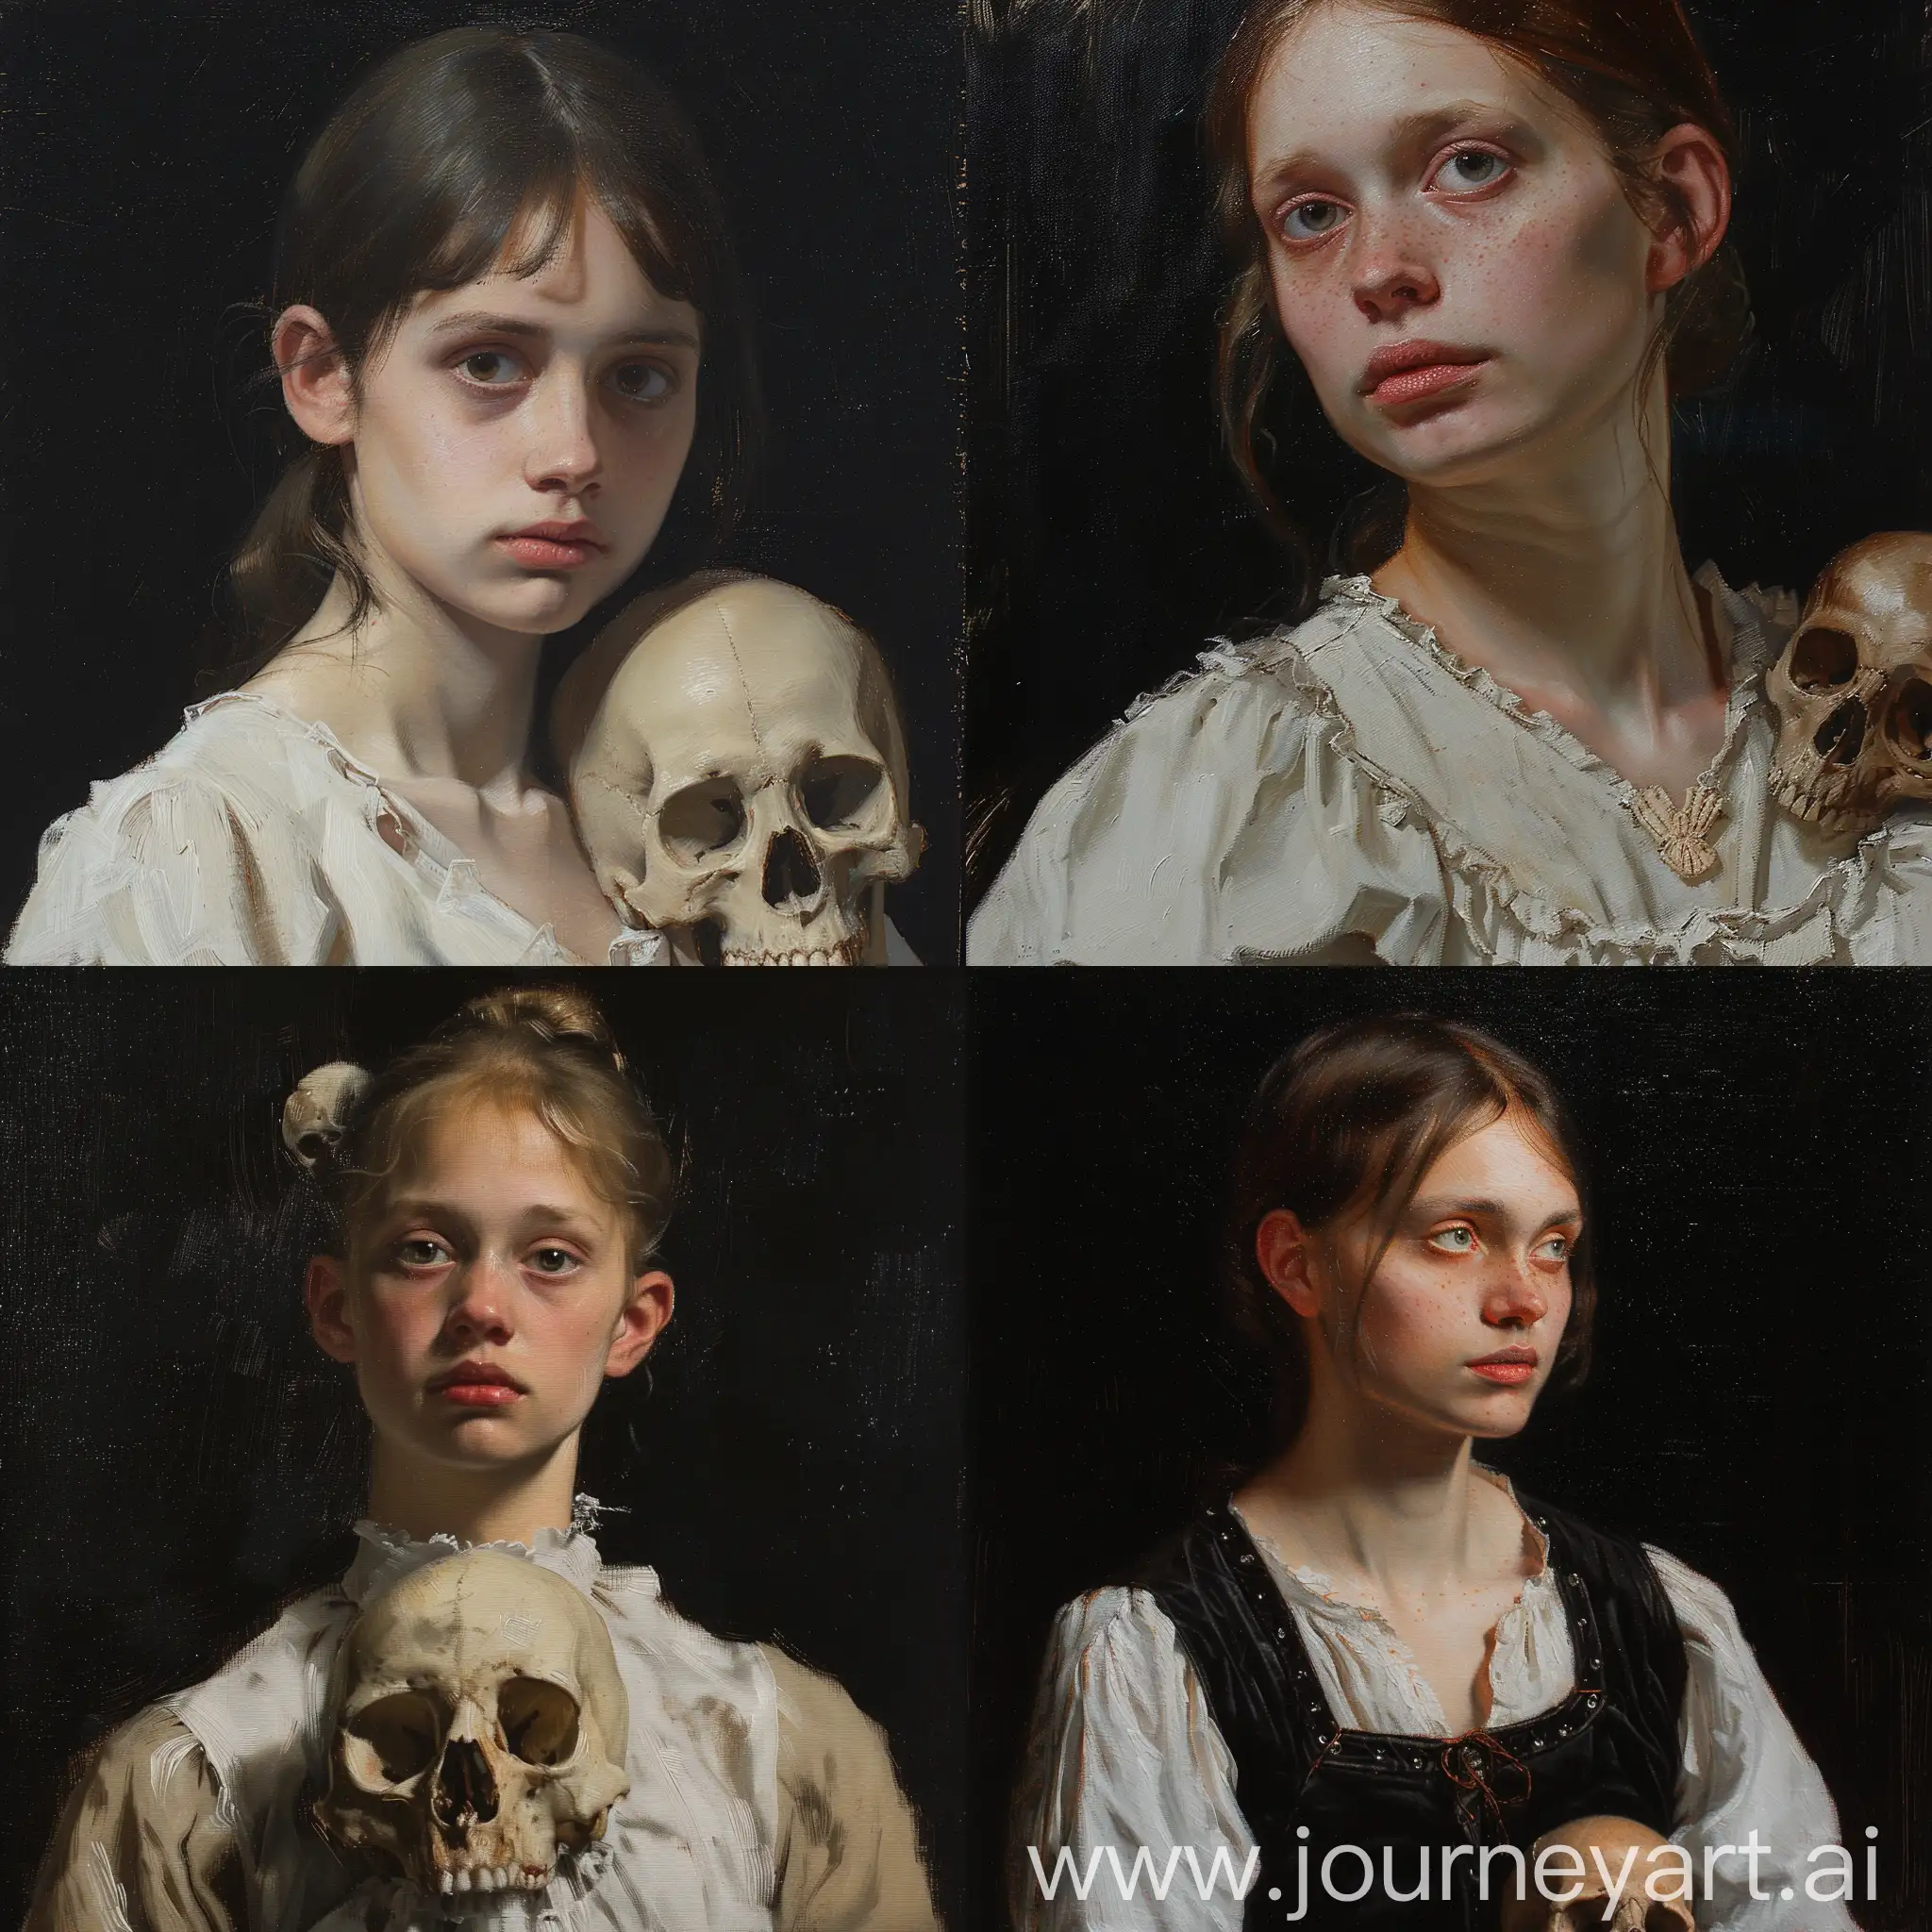 Young-Woman-with-Skull-in-Detailed-Realistic-Oil-Portrait-Style